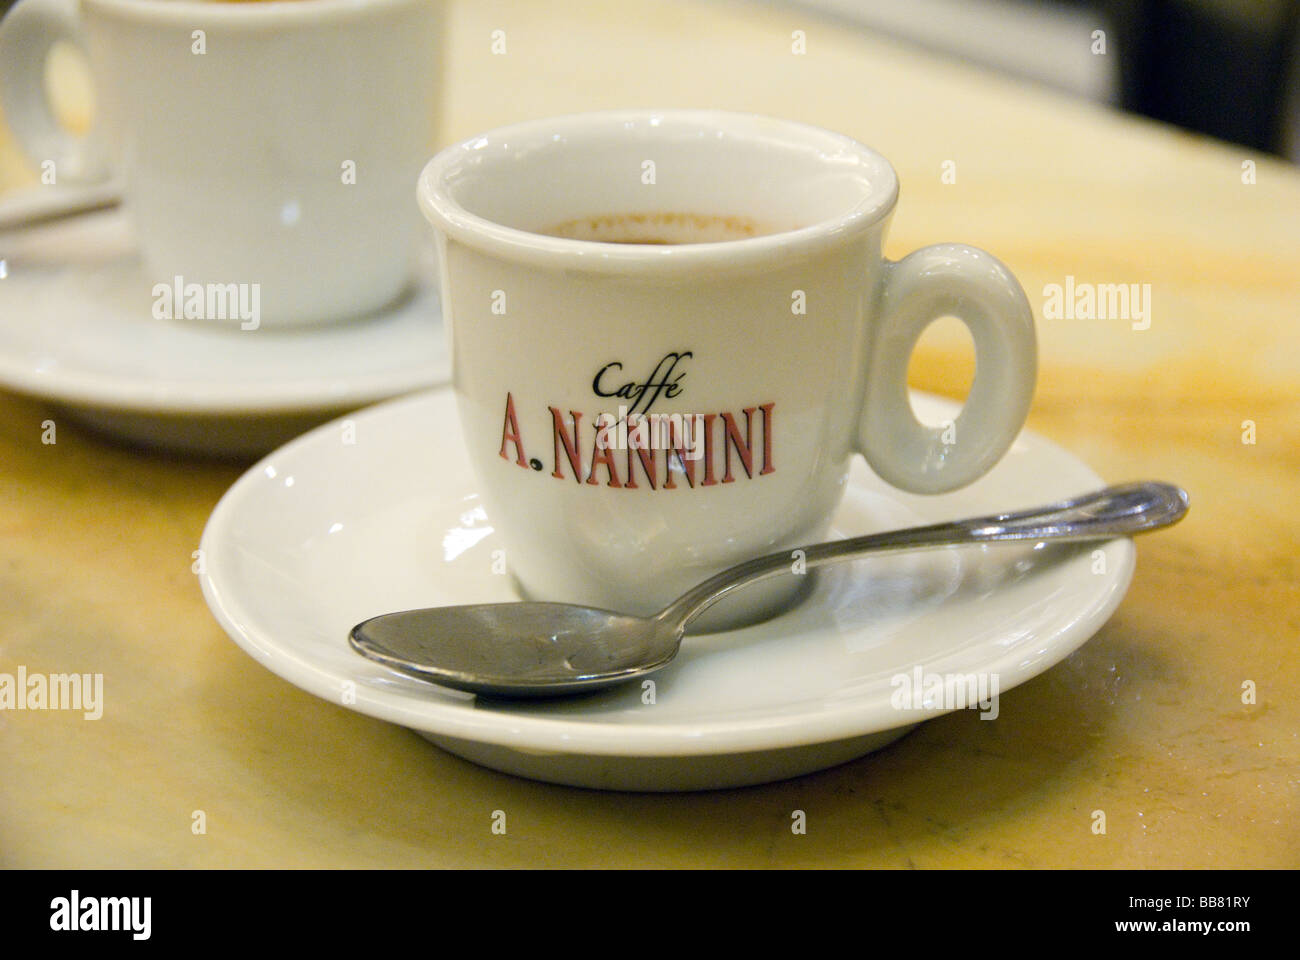 Coffe cup in one of Siena's most famous cafes: Caffé Nannini Stock Photo -  Alamy